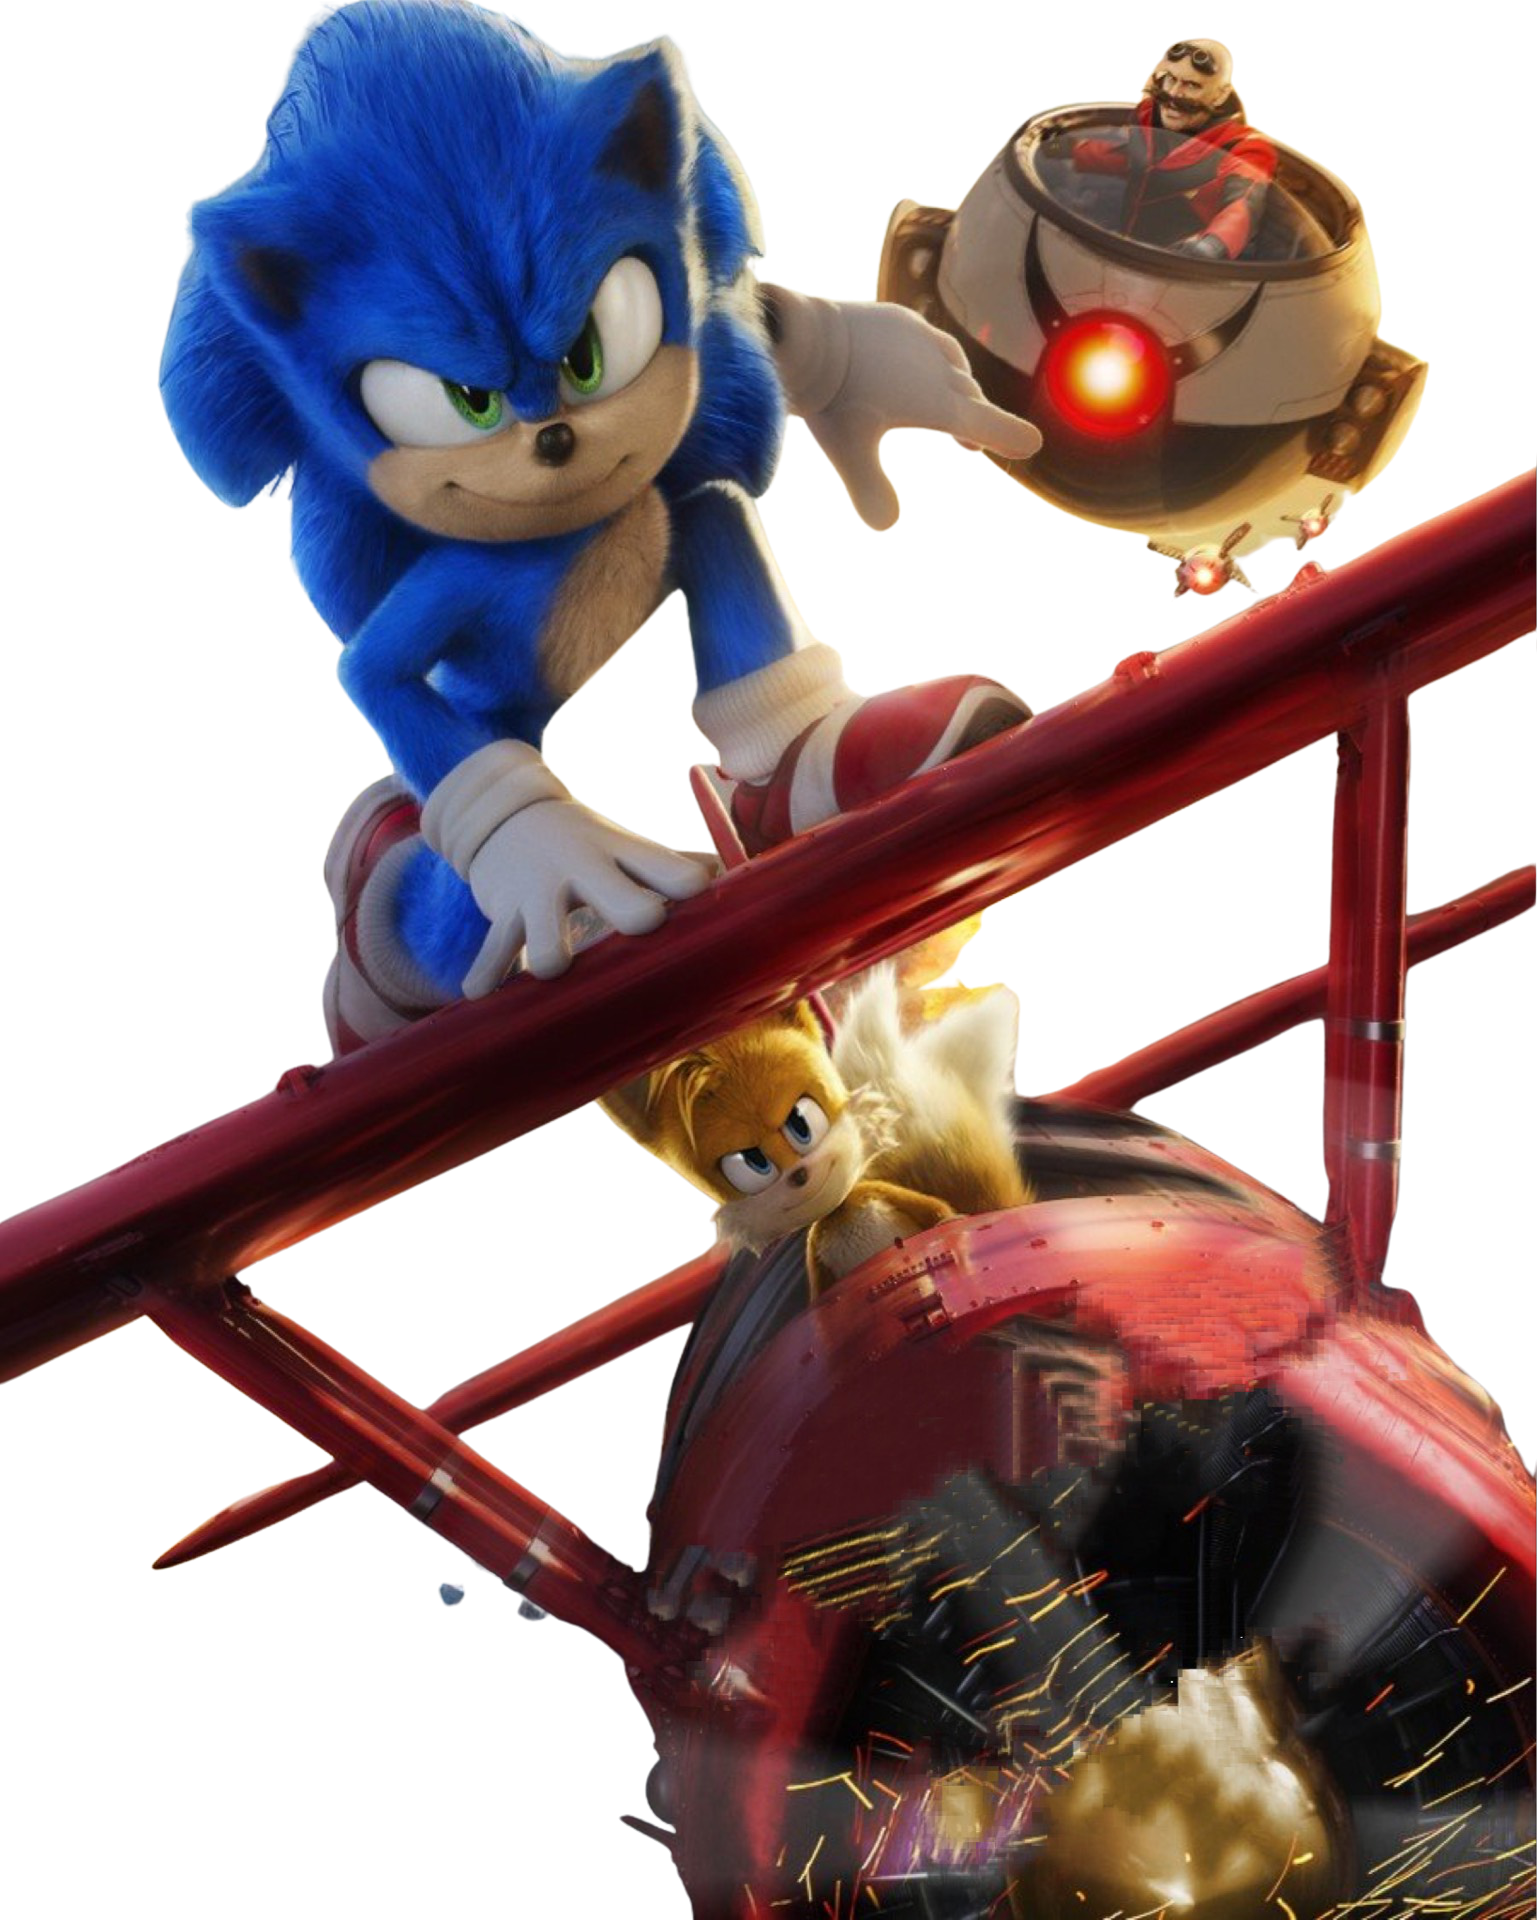 New Sonic 2 Movie Render (In Png) - Sonic! by snowf67 on DeviantArt